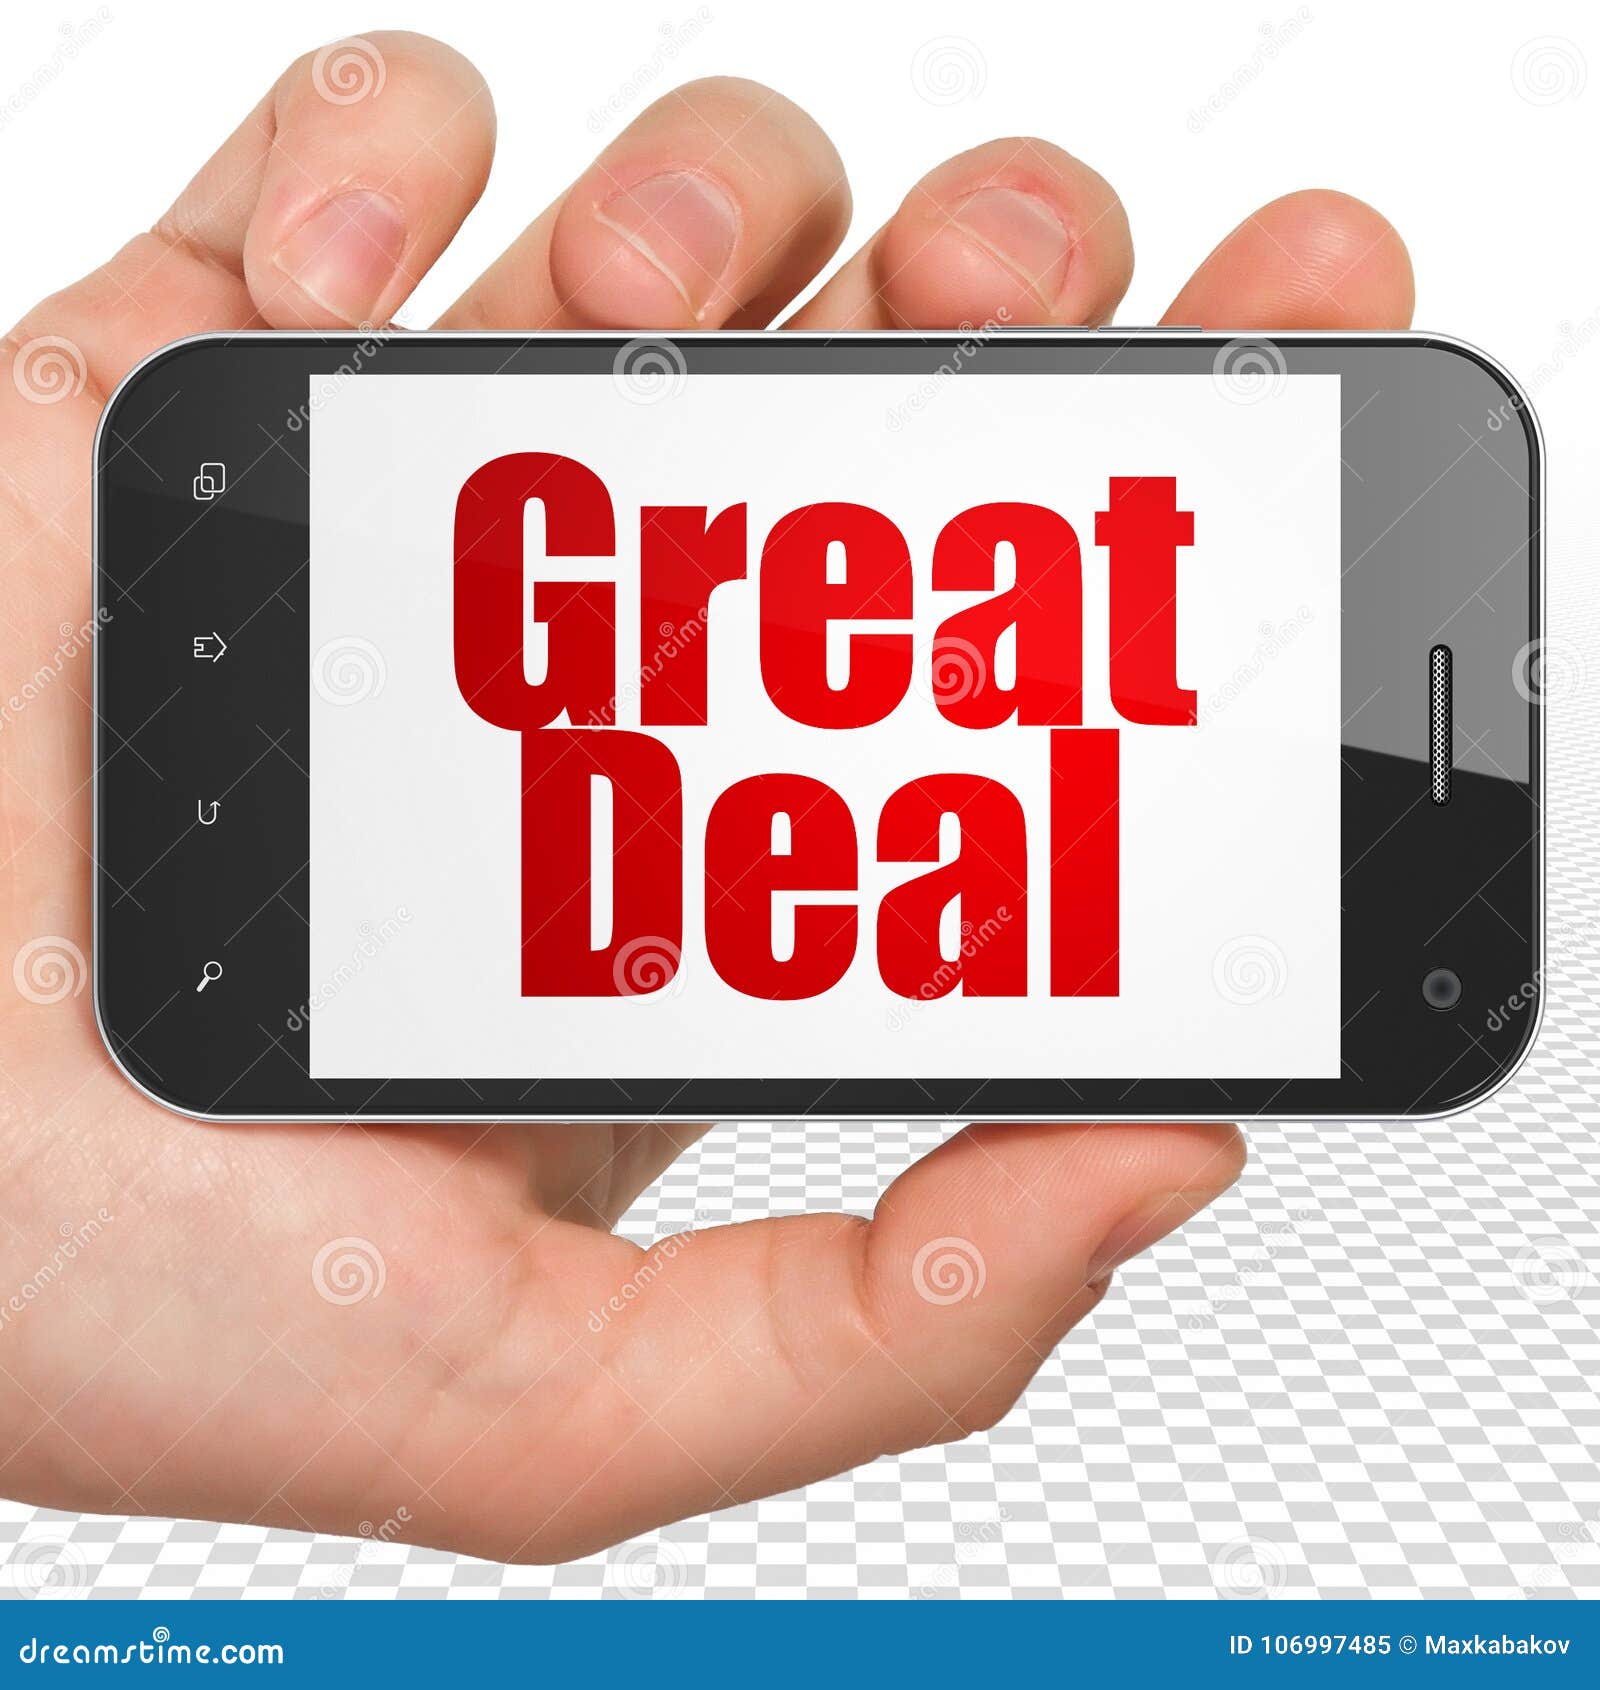 https://thumbs.dreamstime.com/z/business-concept-hand-holding-smartphone-great-deal-display-business-concept-hand-holding-smartphone-red-text-great-106997485.jpg